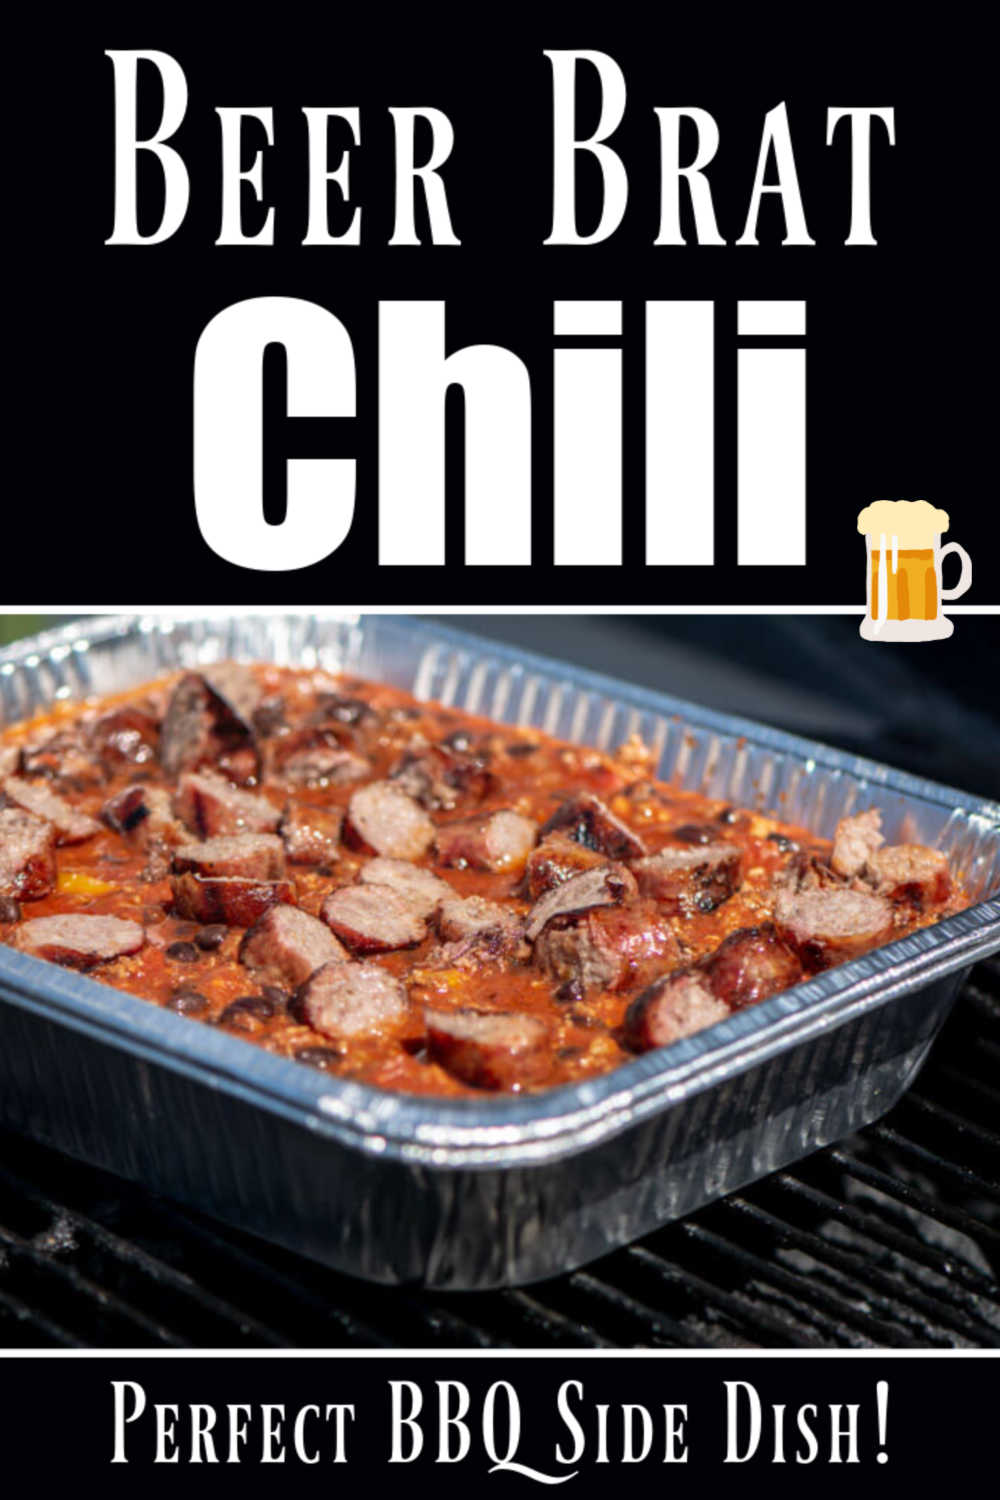 Amazing Grilled Beer Brat Chili {50 Minutes}